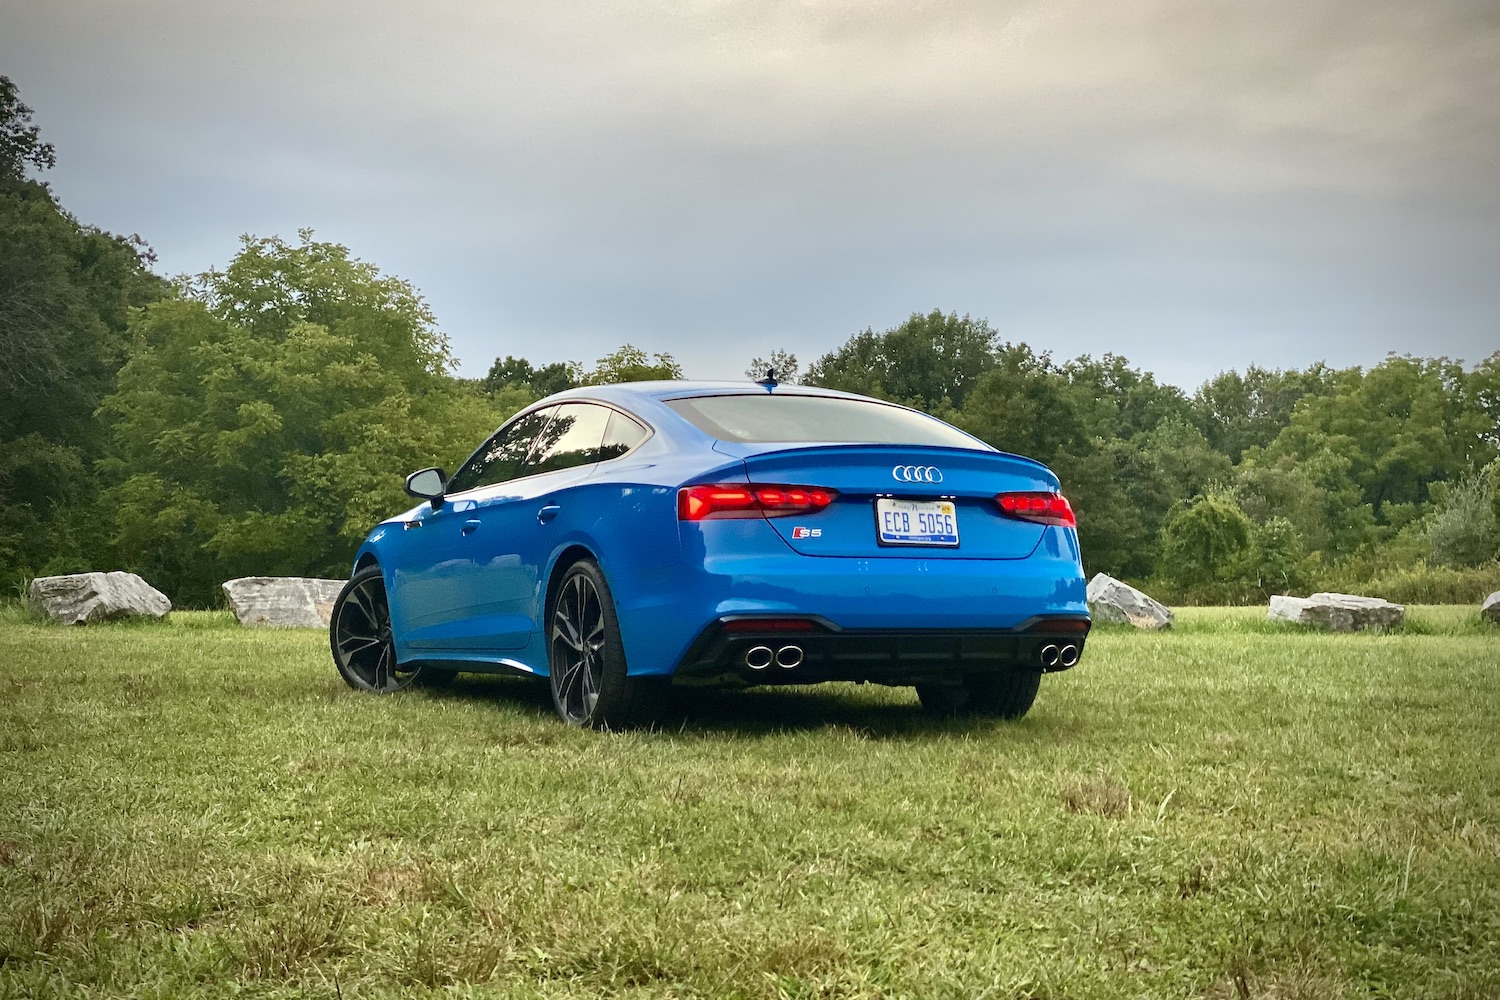 Rear end angle of 2023 Audi S5 Sportback from driver's side in a grassy field during a sunset.